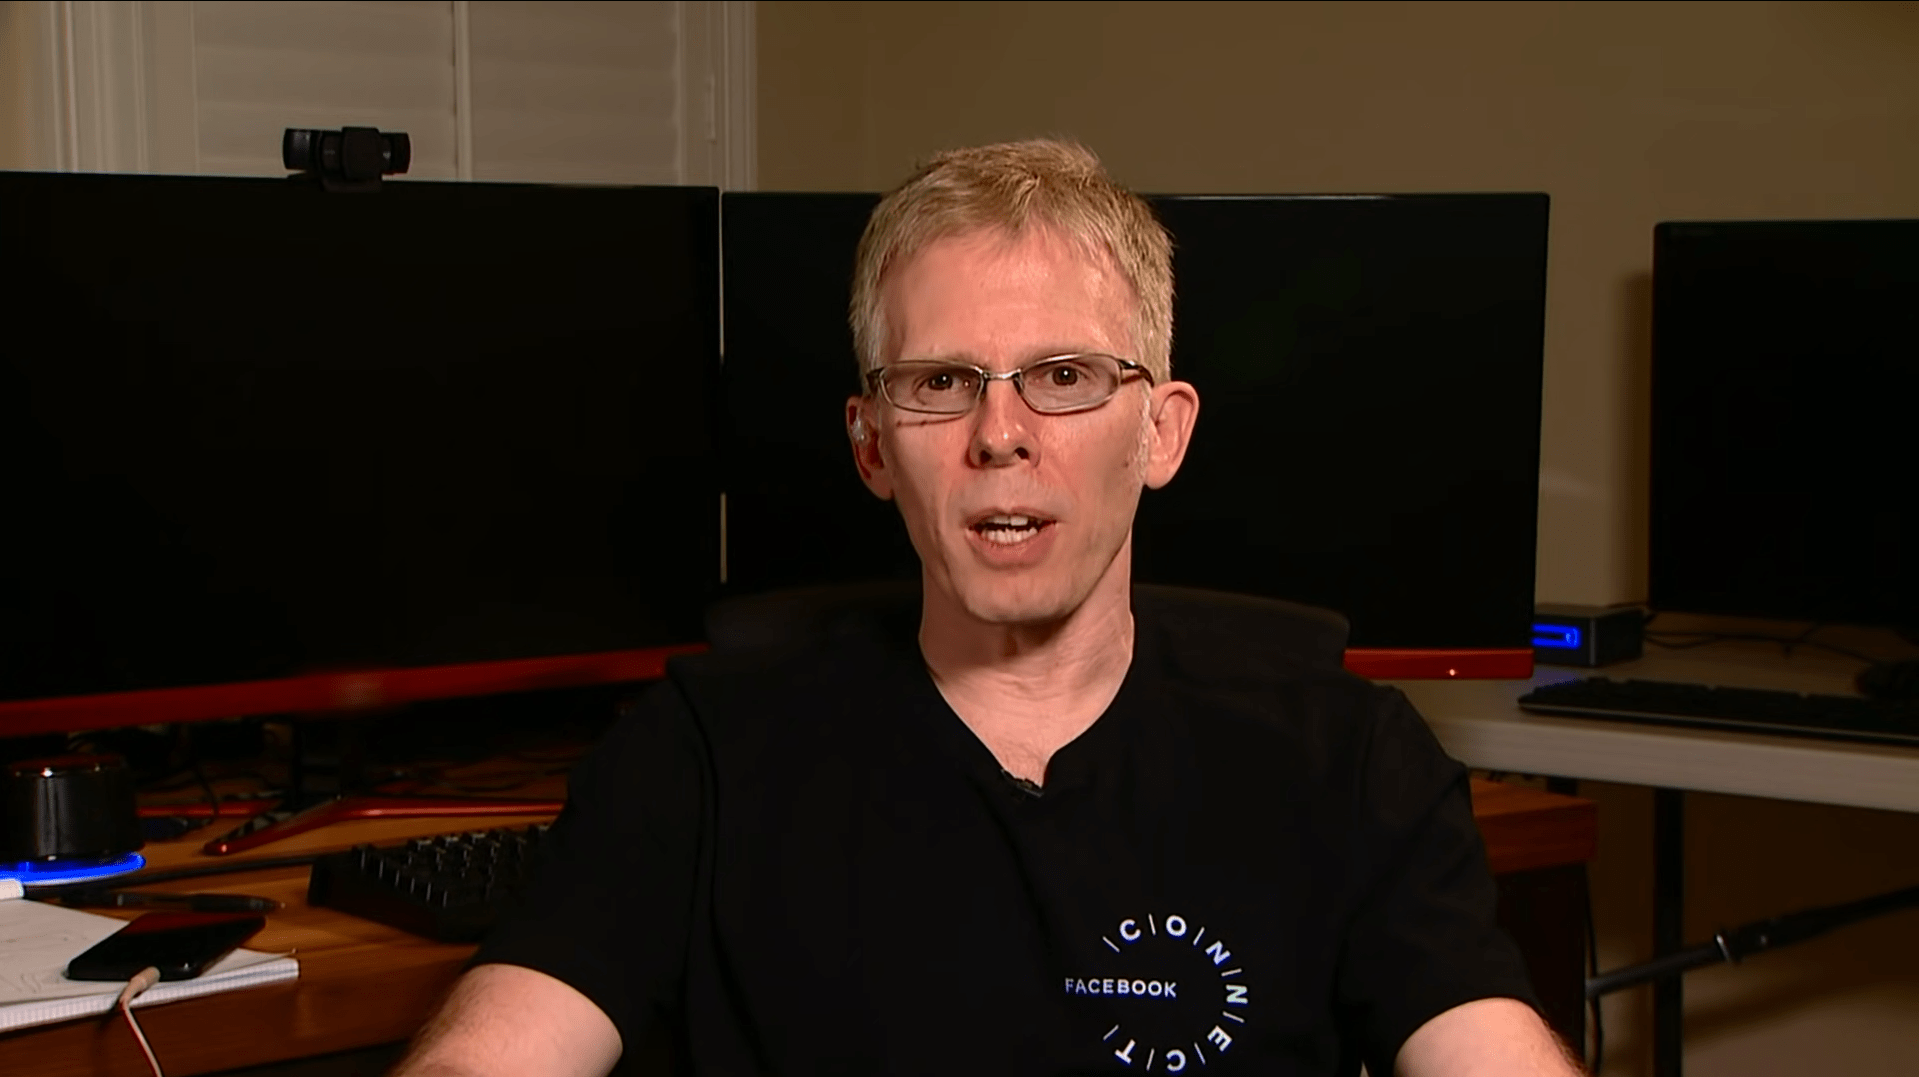 John Carmack talks turkey on and in VR at this year's Meta Connect